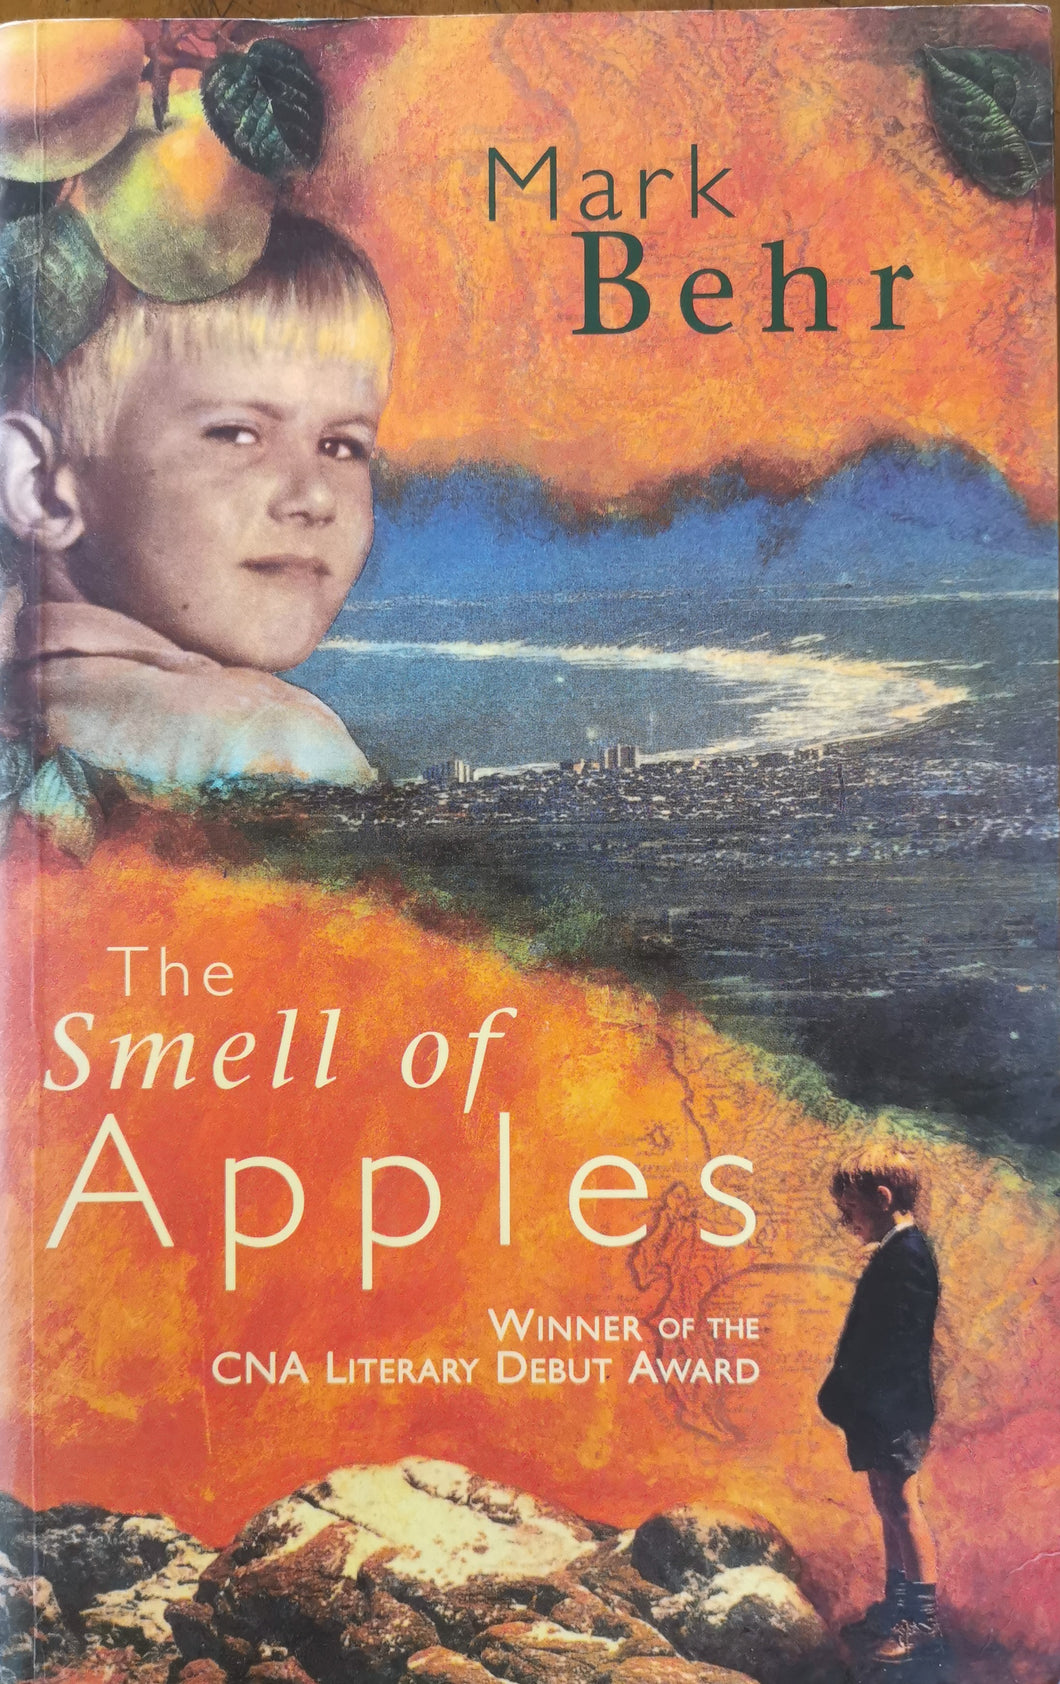 Mark Behr- The Smell of Apples